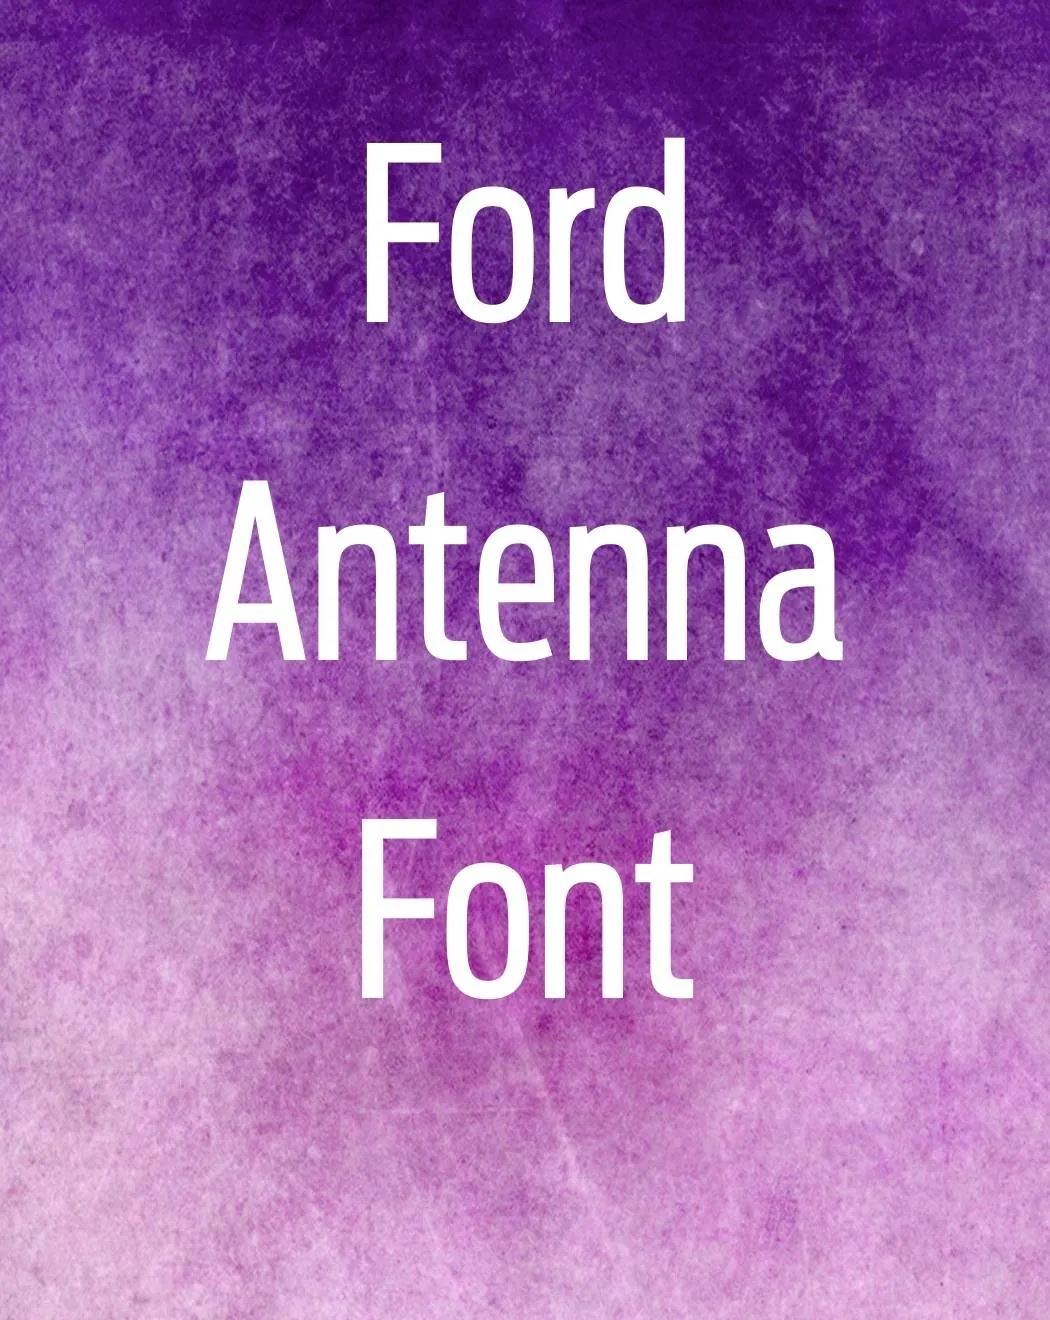 Ford Antenna Font Free Download